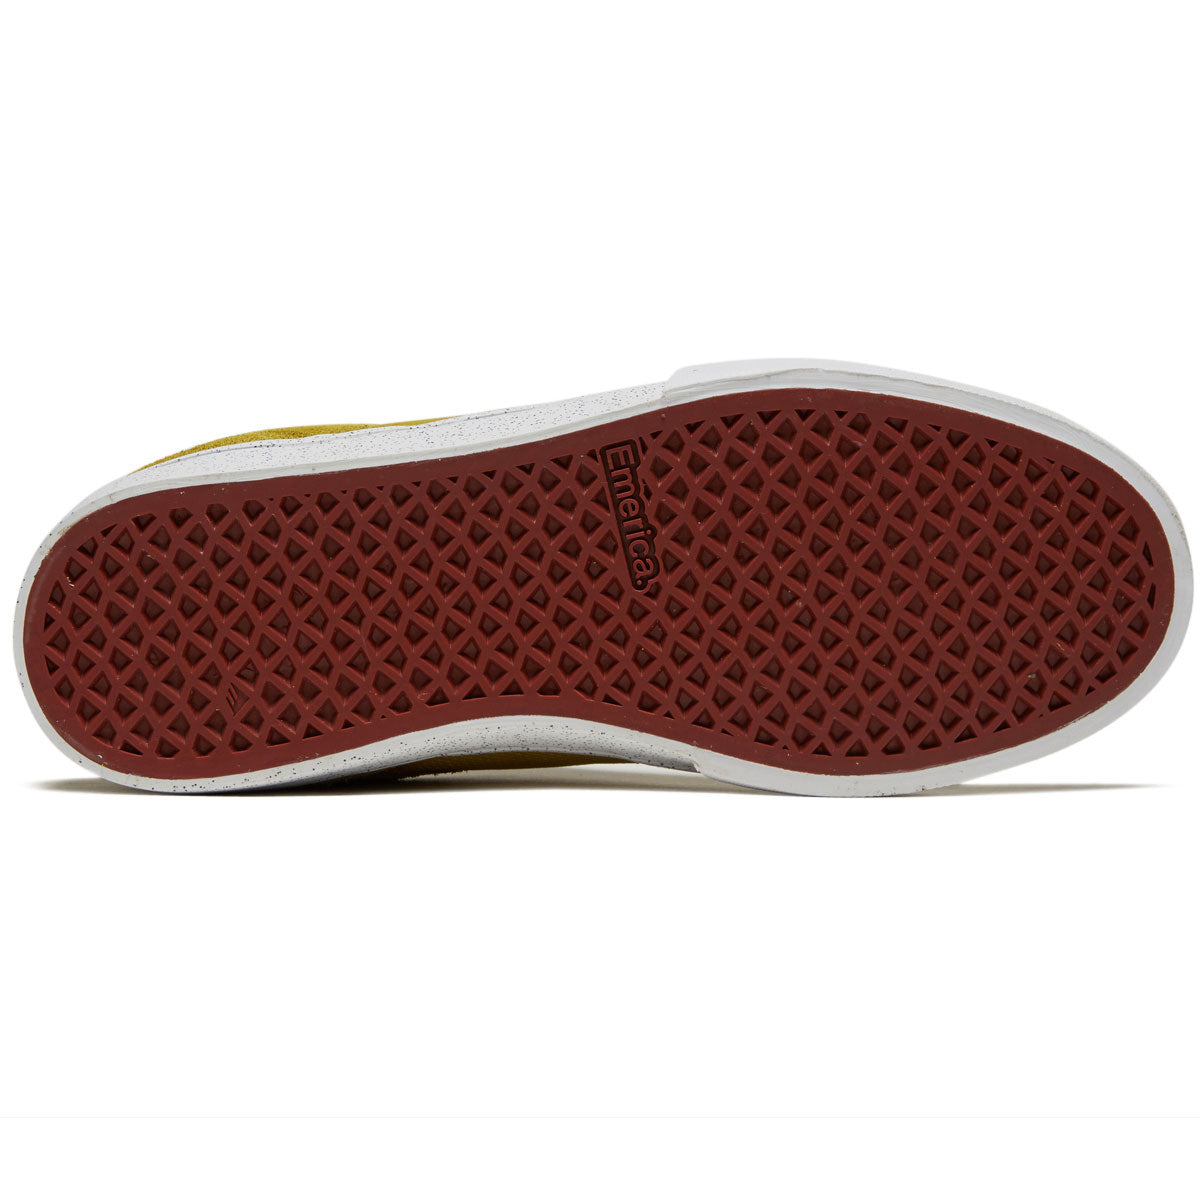 Emerica The Low Vulc Shoes - Gold image 4